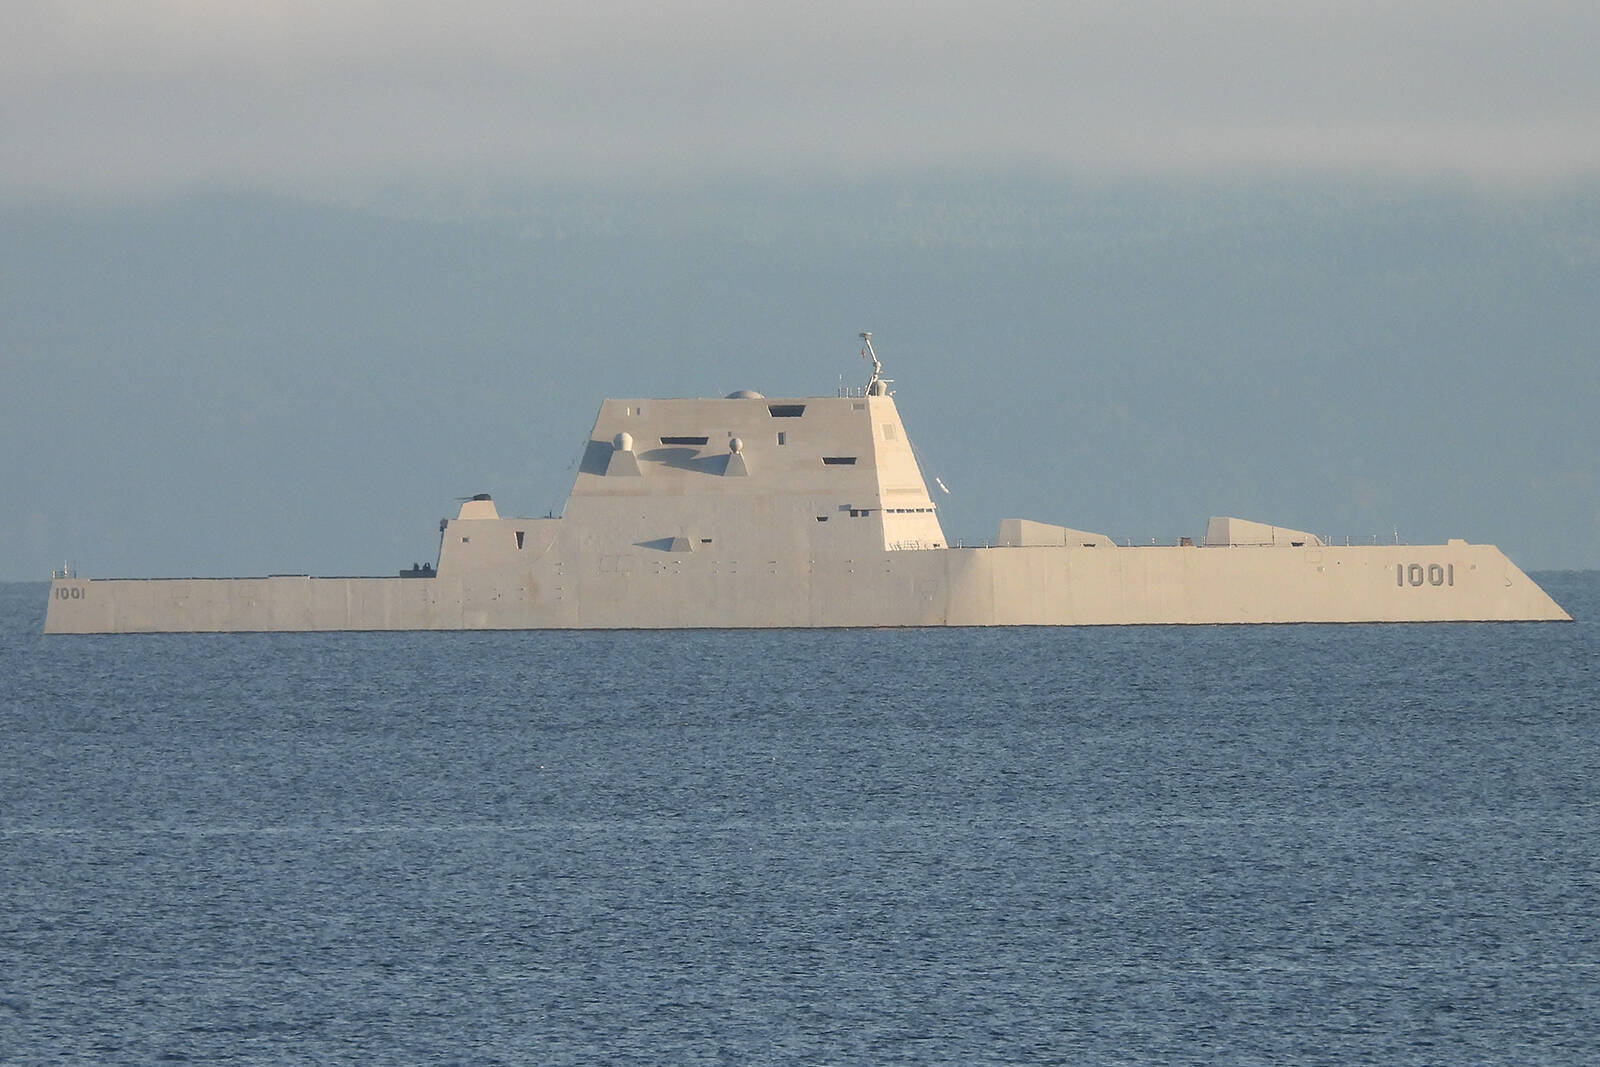 The Zumwalt-class destroyer USS Michael Monsoor was spotted sailing the waters in the Strait of Georgia near Nanaimo on Monday, Oct. 18. (Photo courtesy Tami Mullaly)